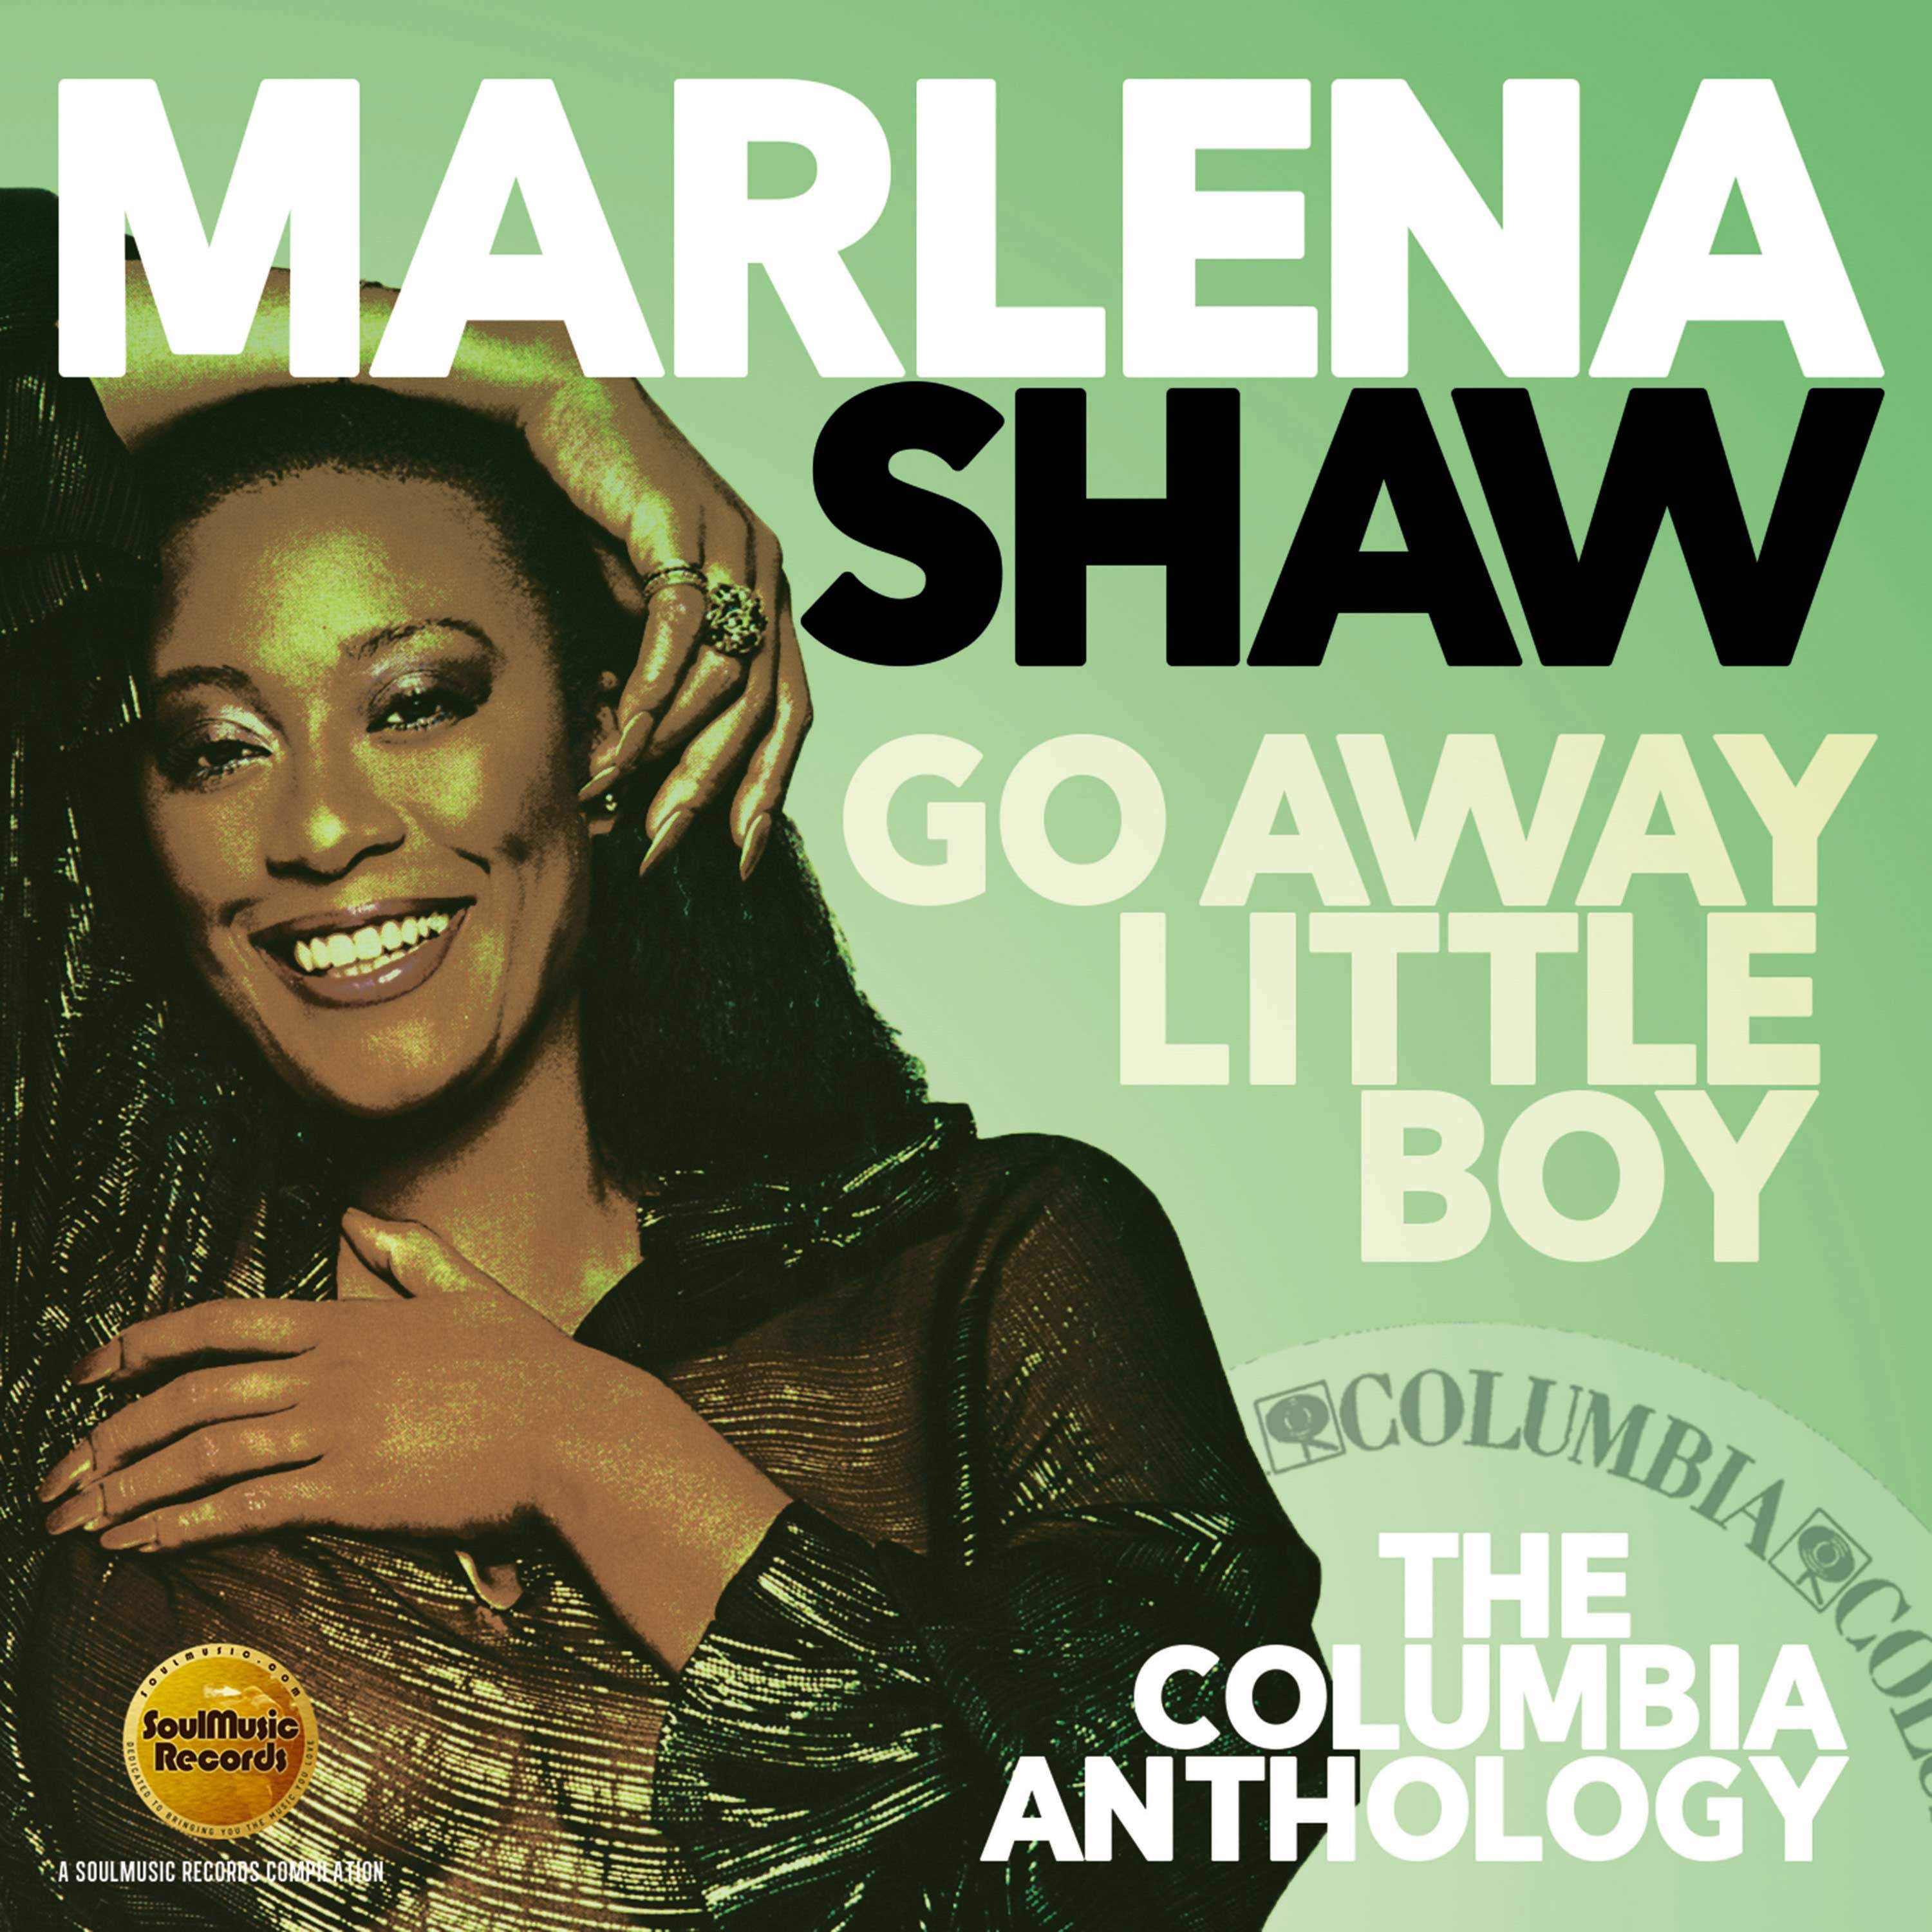 MARLENA SHAW - Go Away Little Boy – The Columbia Anthology cover 